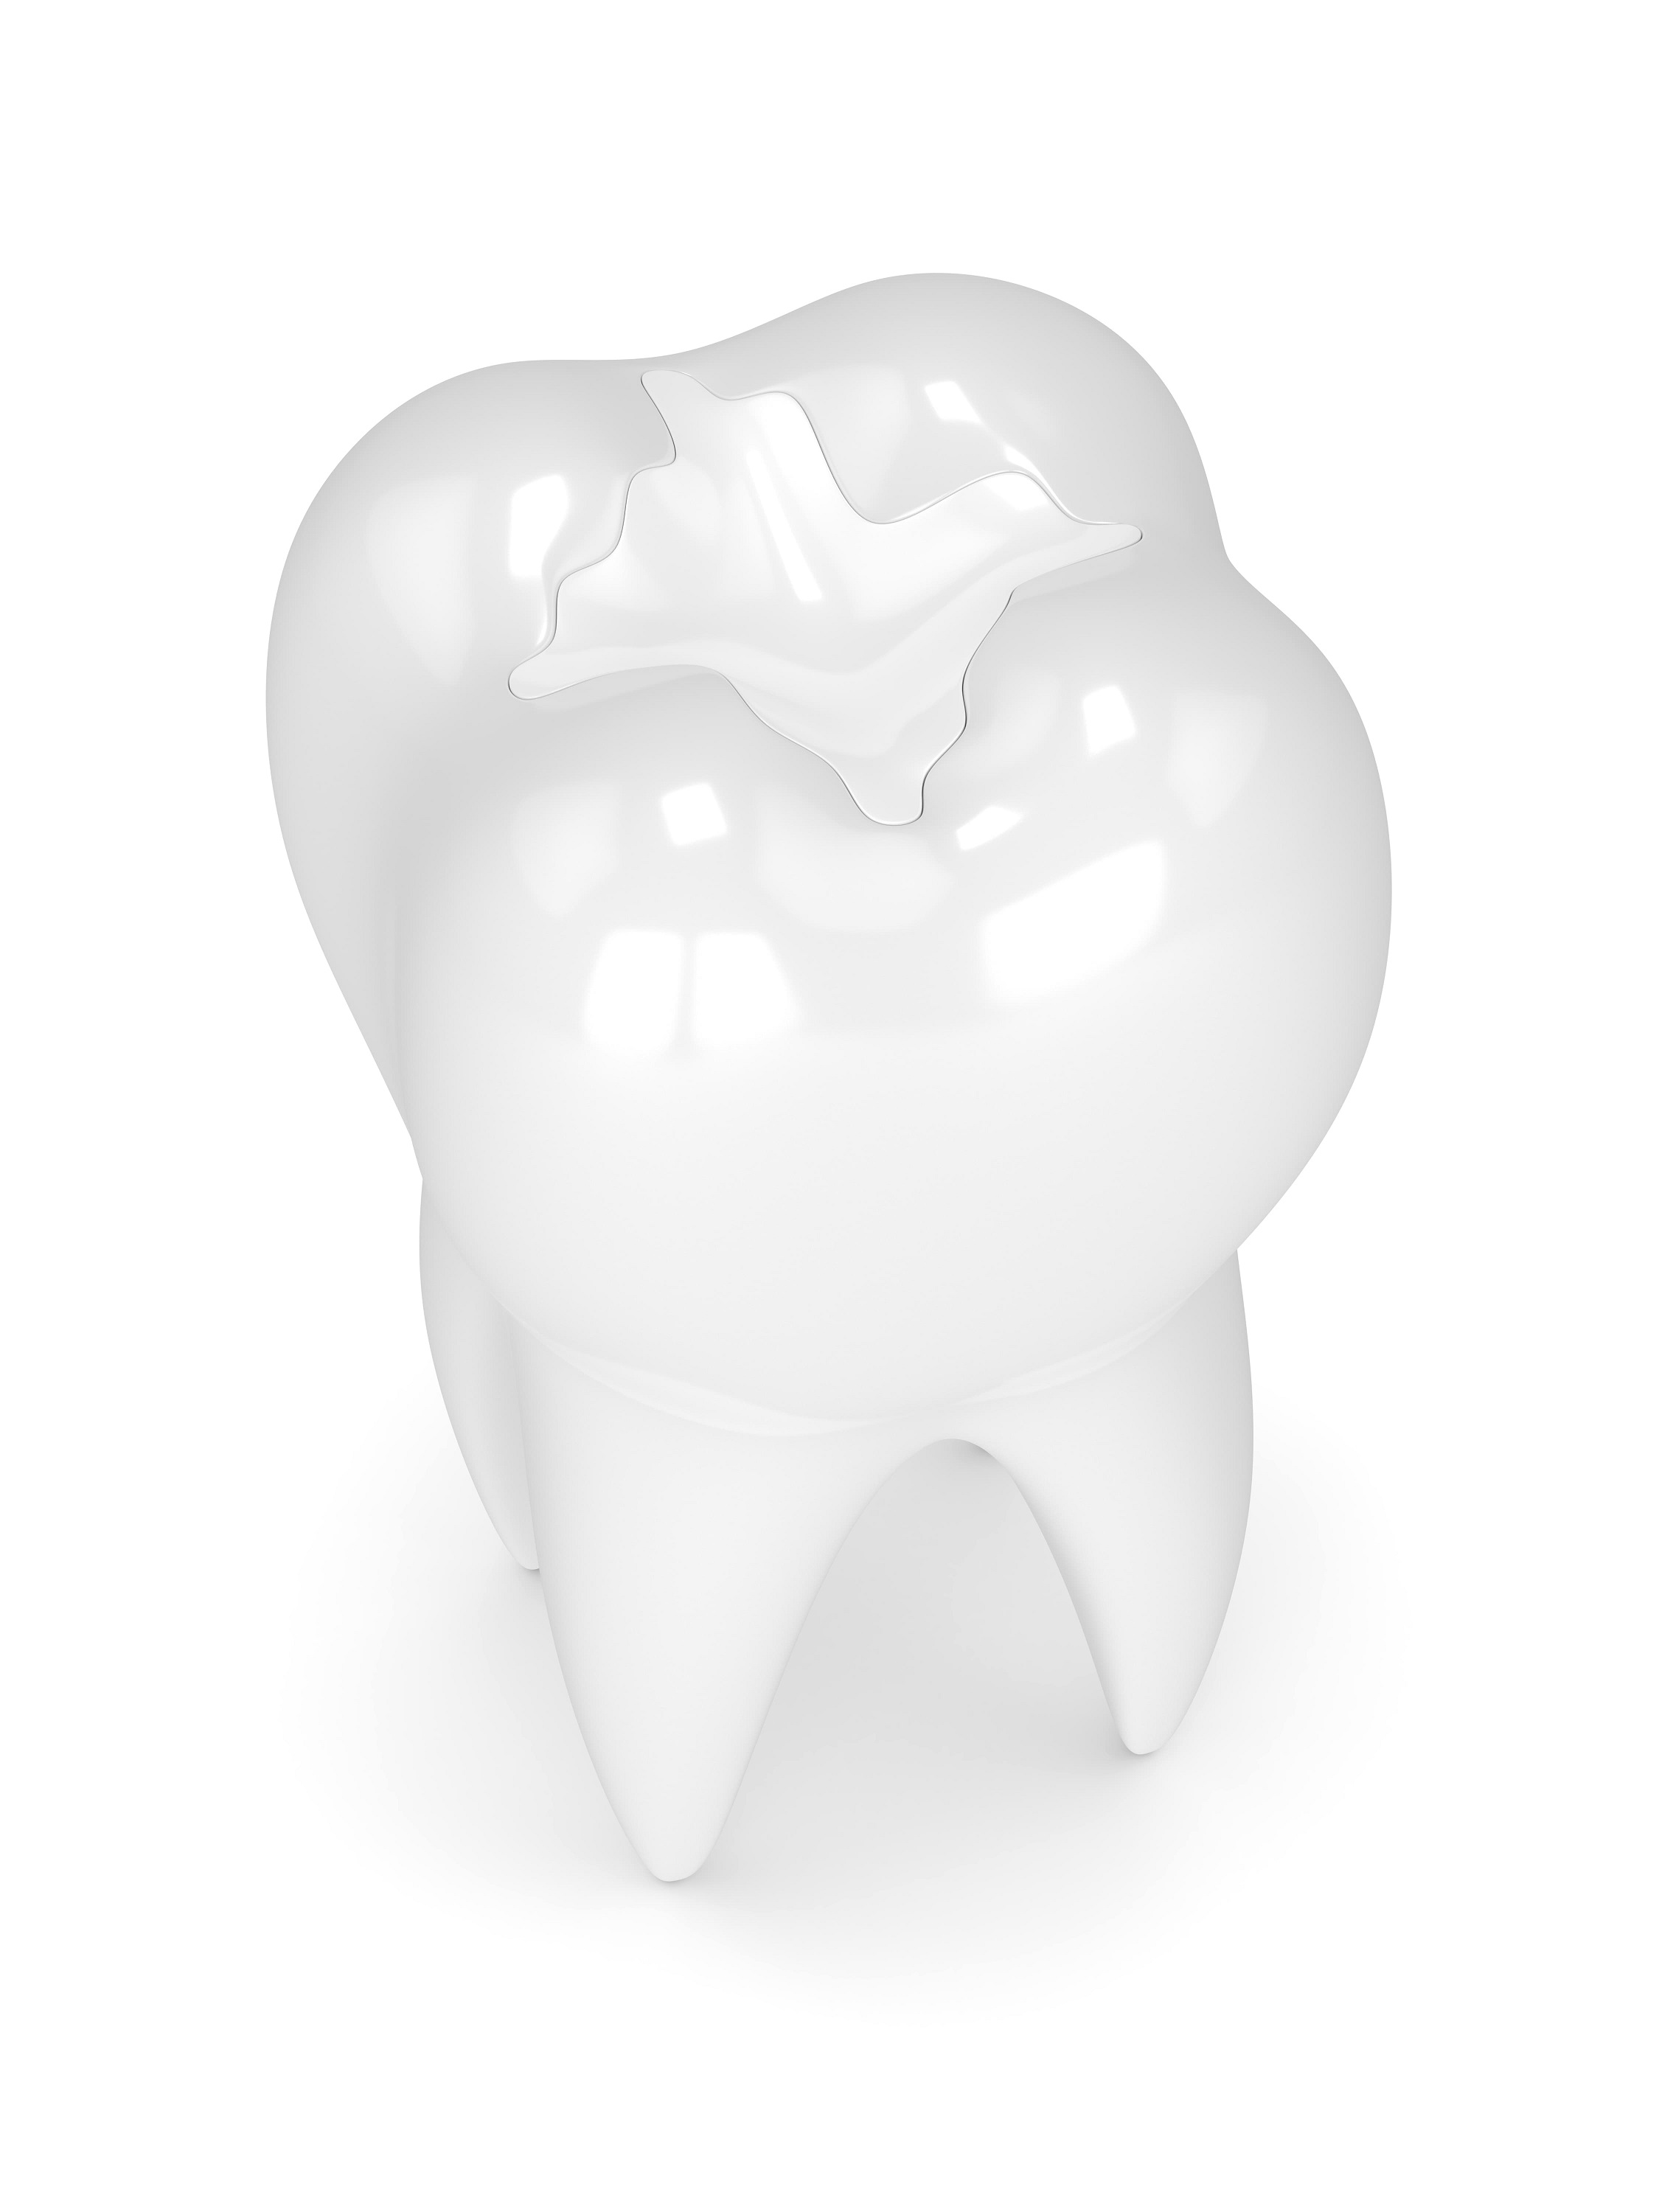 3D render of tooth.